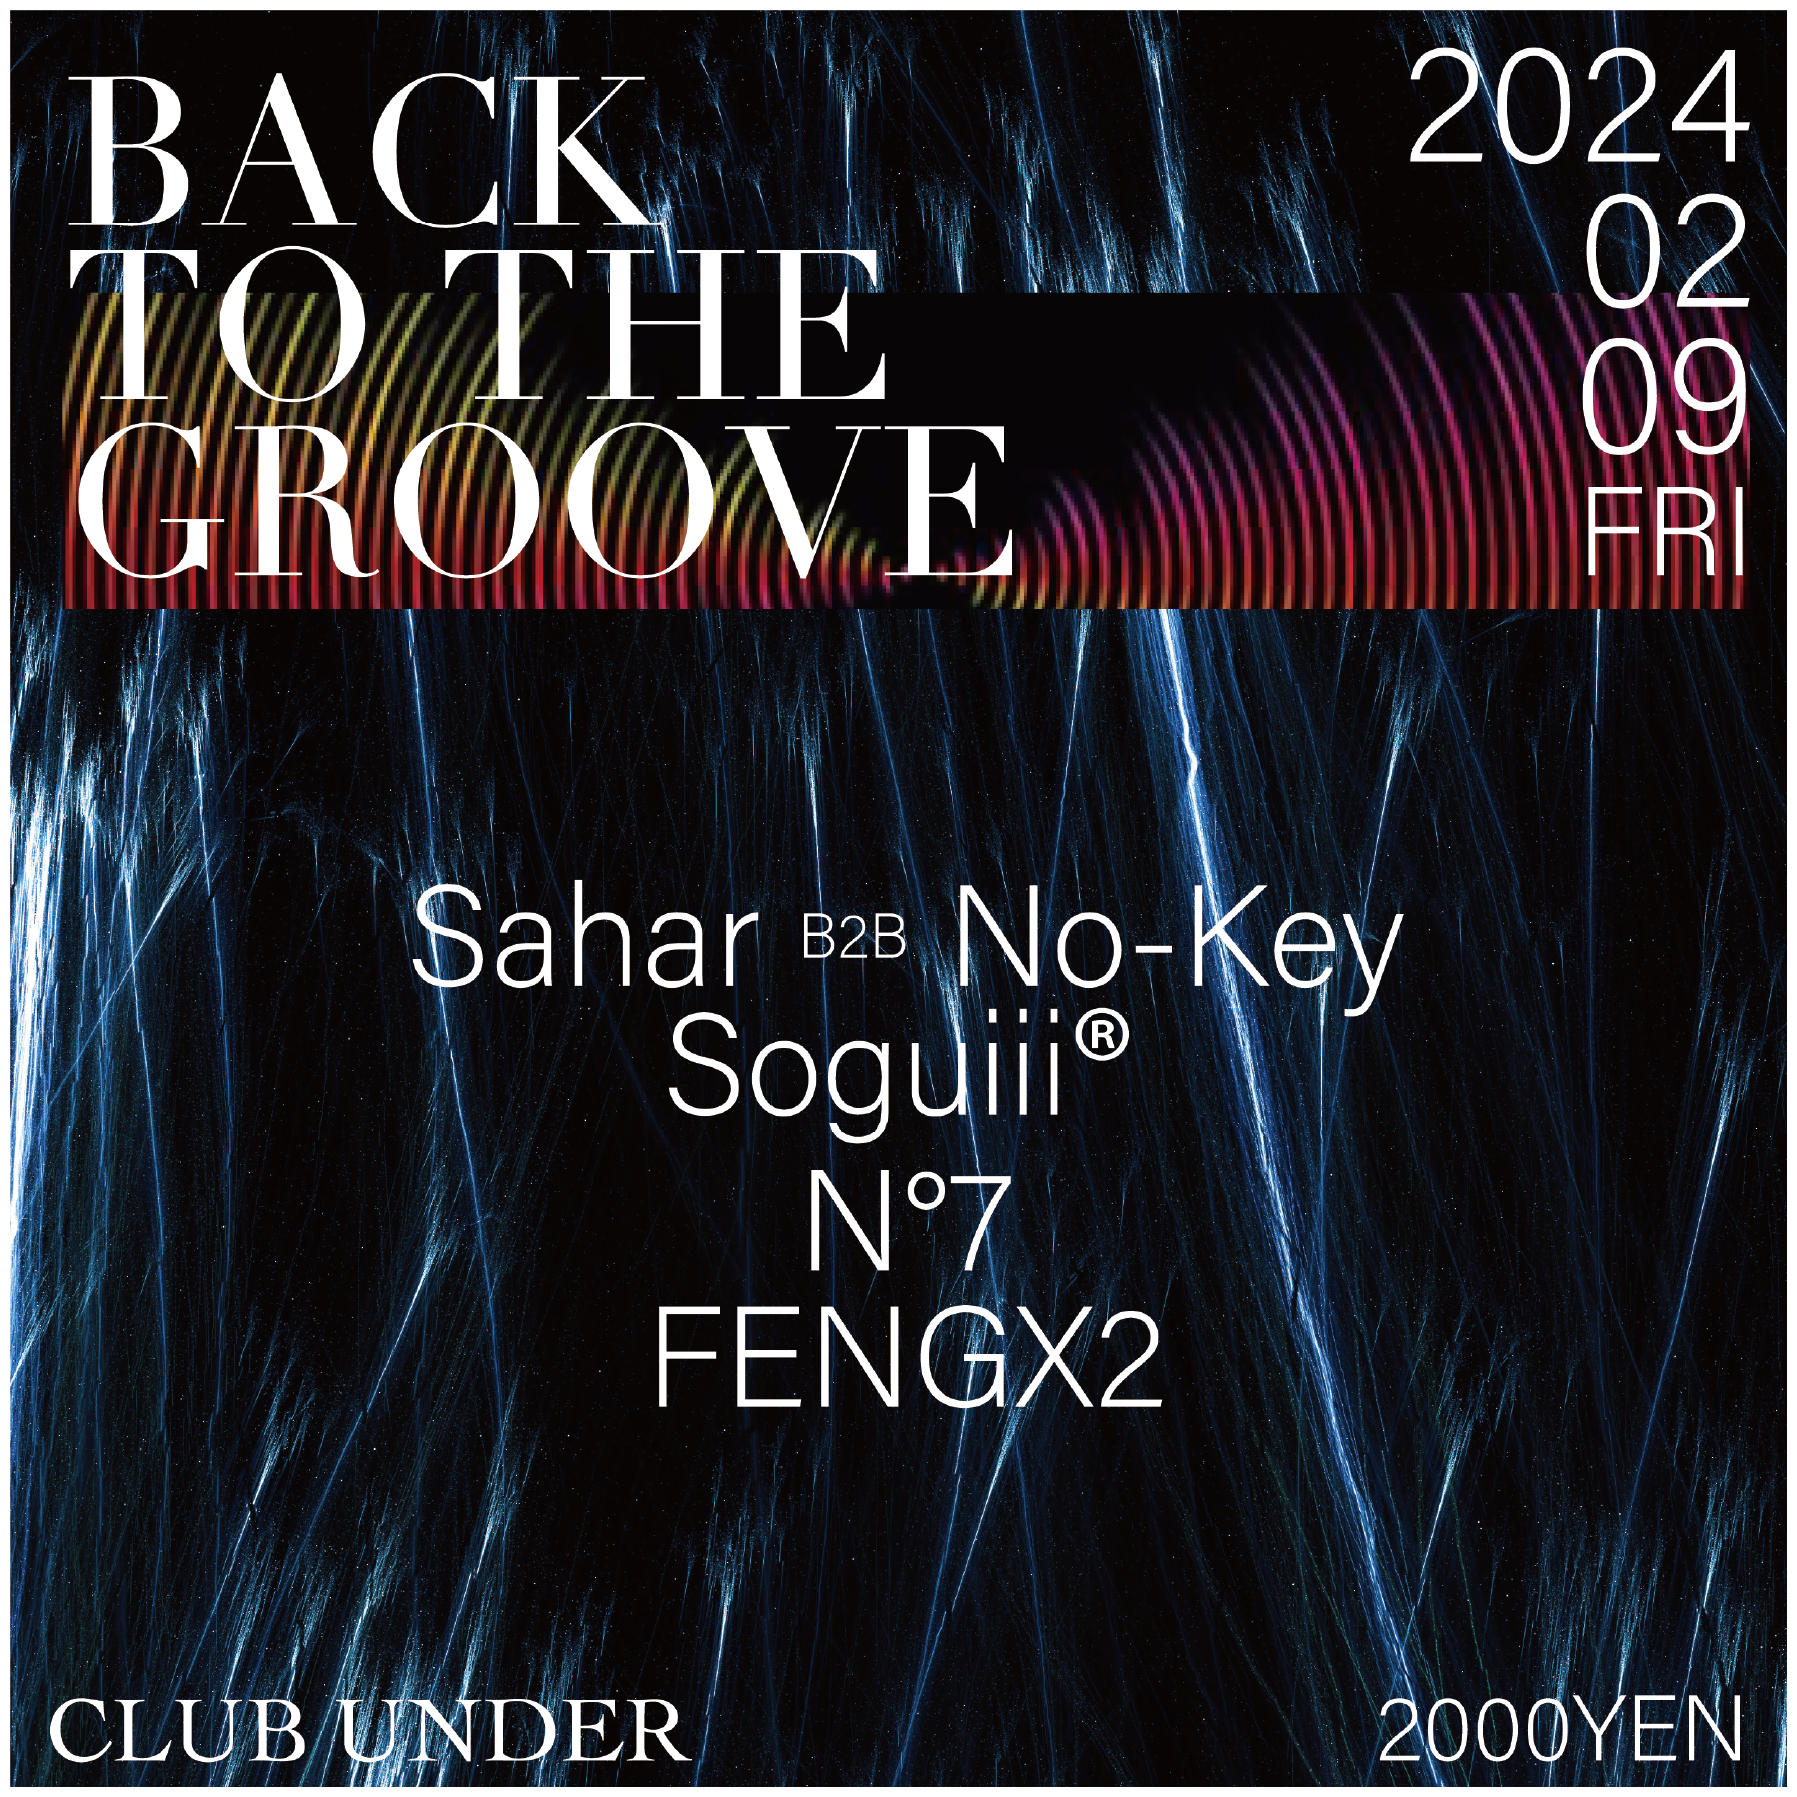 BACK TO THE GROOVE / TECHNO - フライヤー表